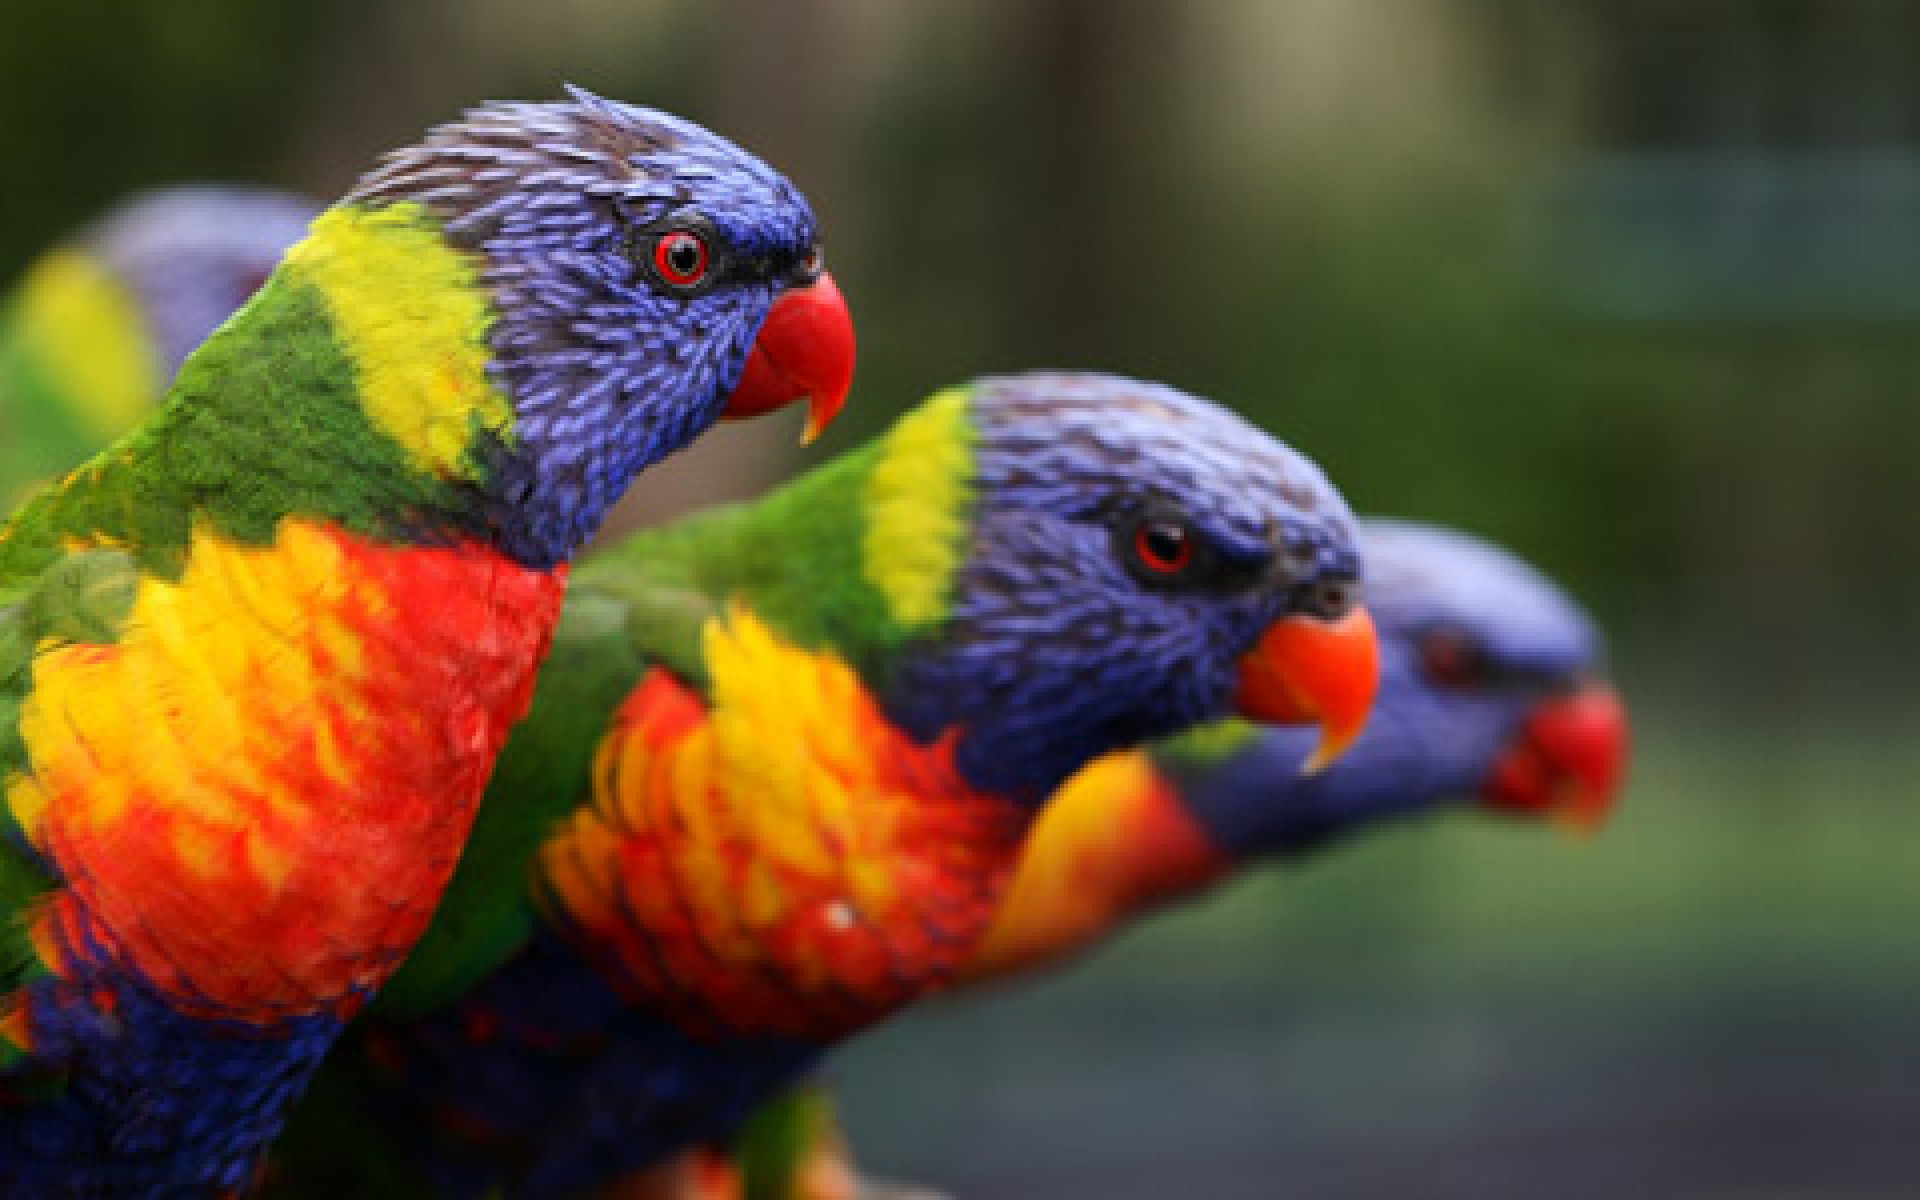 Colorful Parrot Bird Picture - High Resolution Parrot Photography - HD Wallpaper 